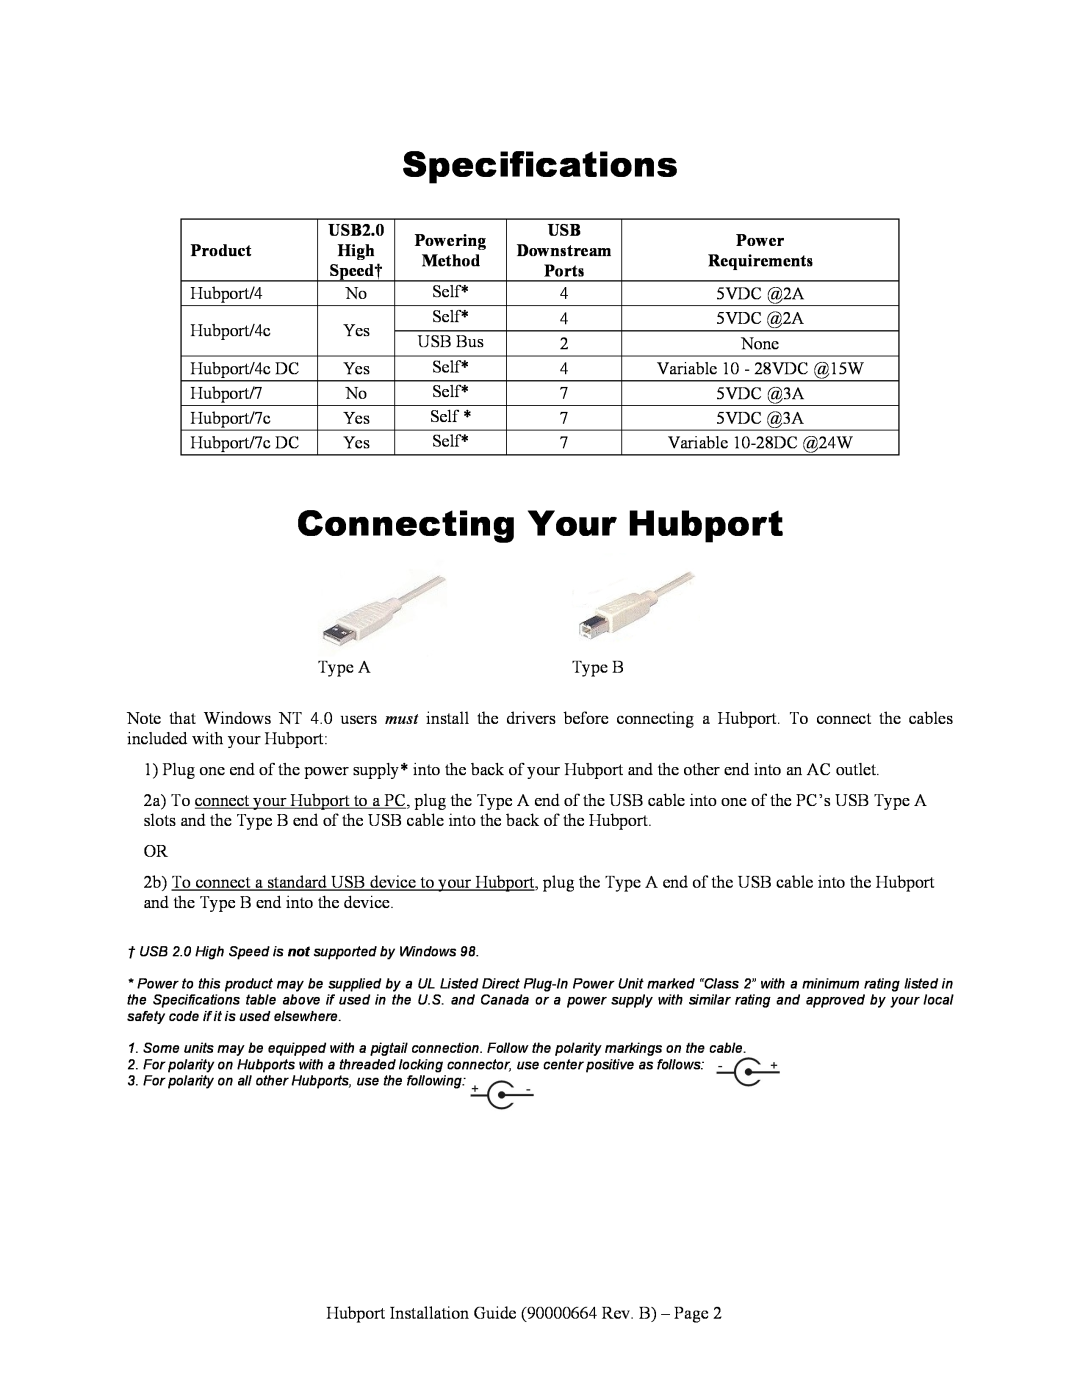 Digi Hubport/4c Specifications, Connecting Your Hubport, USB2.0, Powering, Product, High, Downstream, Method, Requirements 